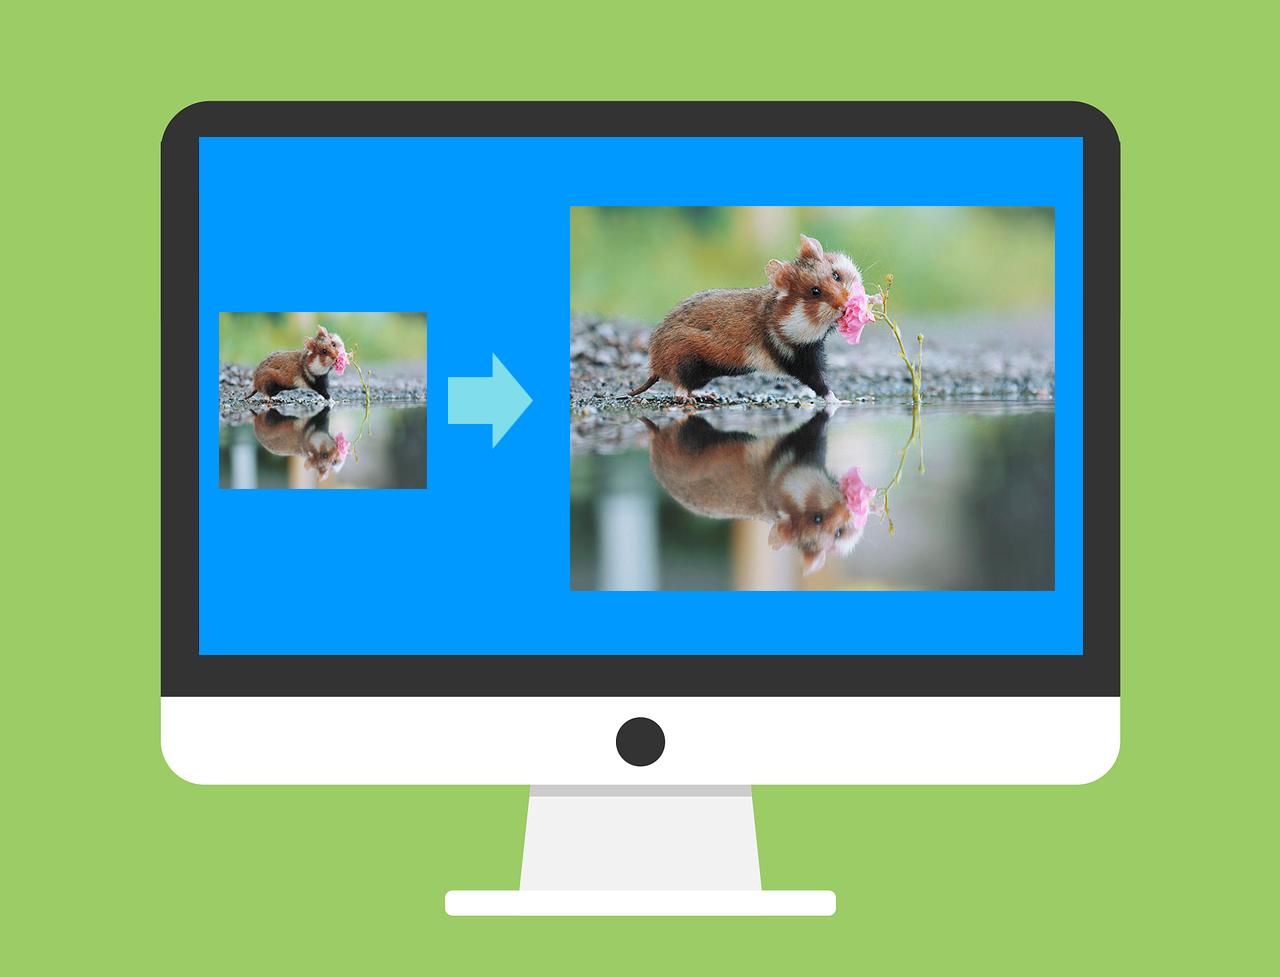 best free picture resizing software